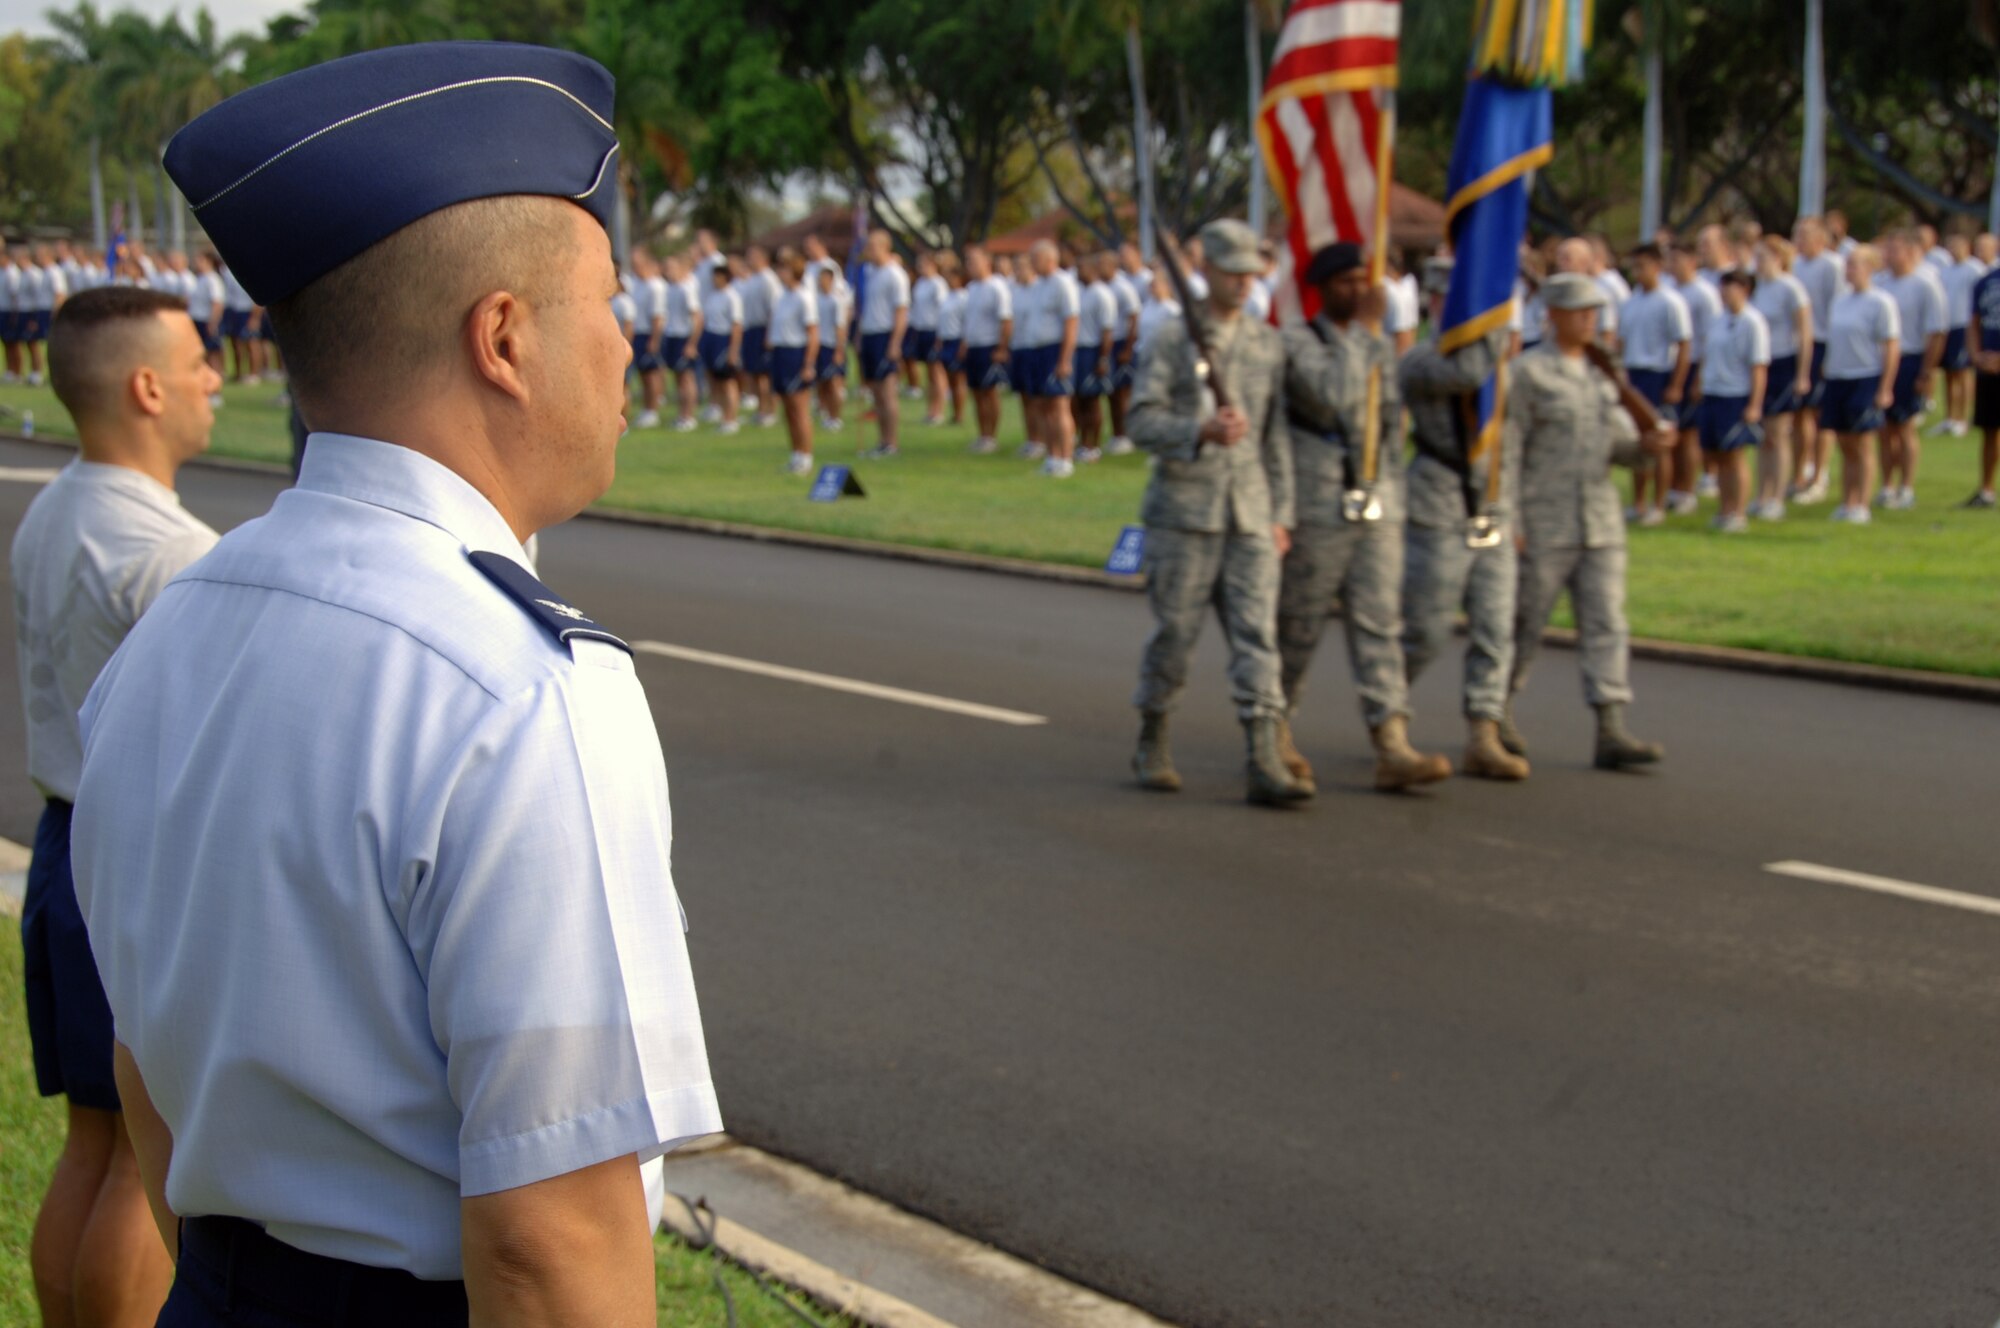 Col. Giovanni Tuck, 15th Airlift Wing commander, observes the honor guard prepare to present the colors before the "Warrior Run" May 7 at Joint Base Pearl Harbor Hickam, Hi. The run was the last Col. Tuck will be a part of as commander of the 15th AW. (U.S. Air Force photo by Senior Airman Nathan Allen)